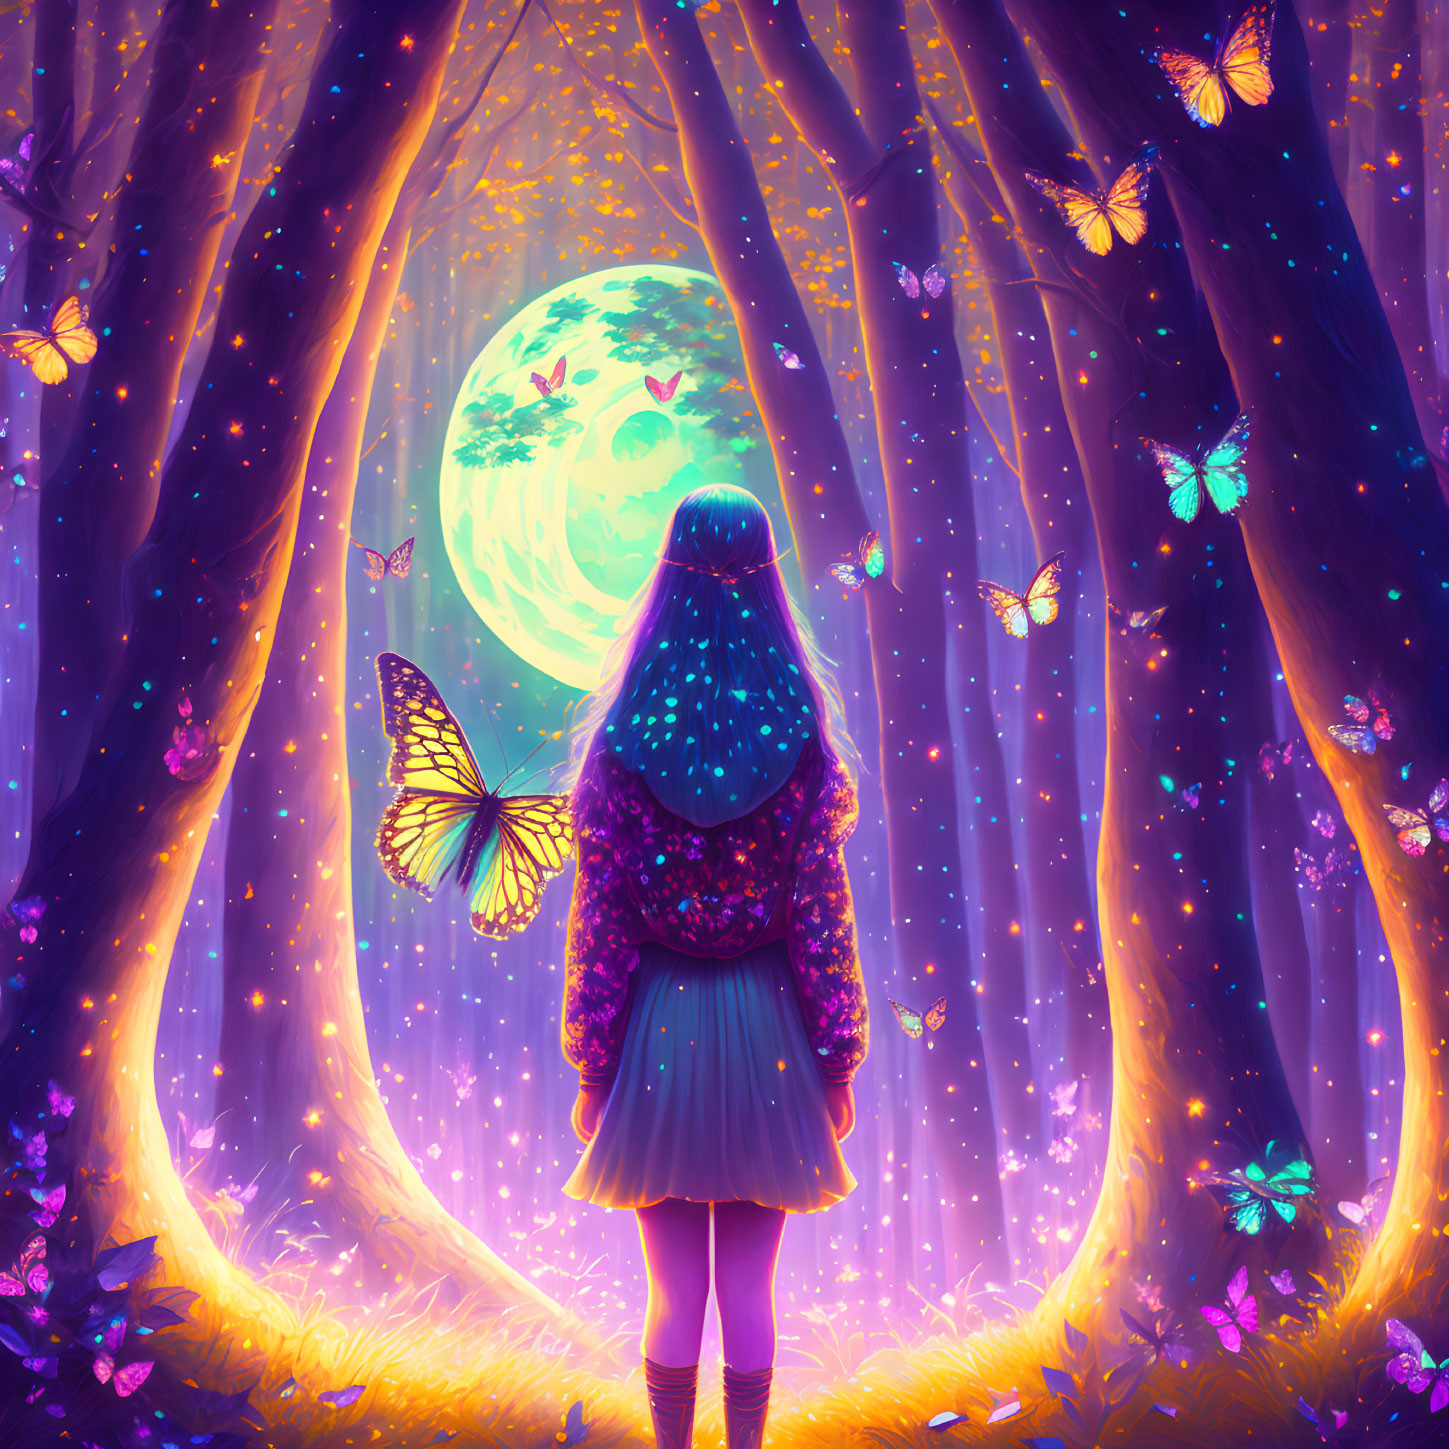 Girl admires glowing moon in magical forest with fluttering butterflies